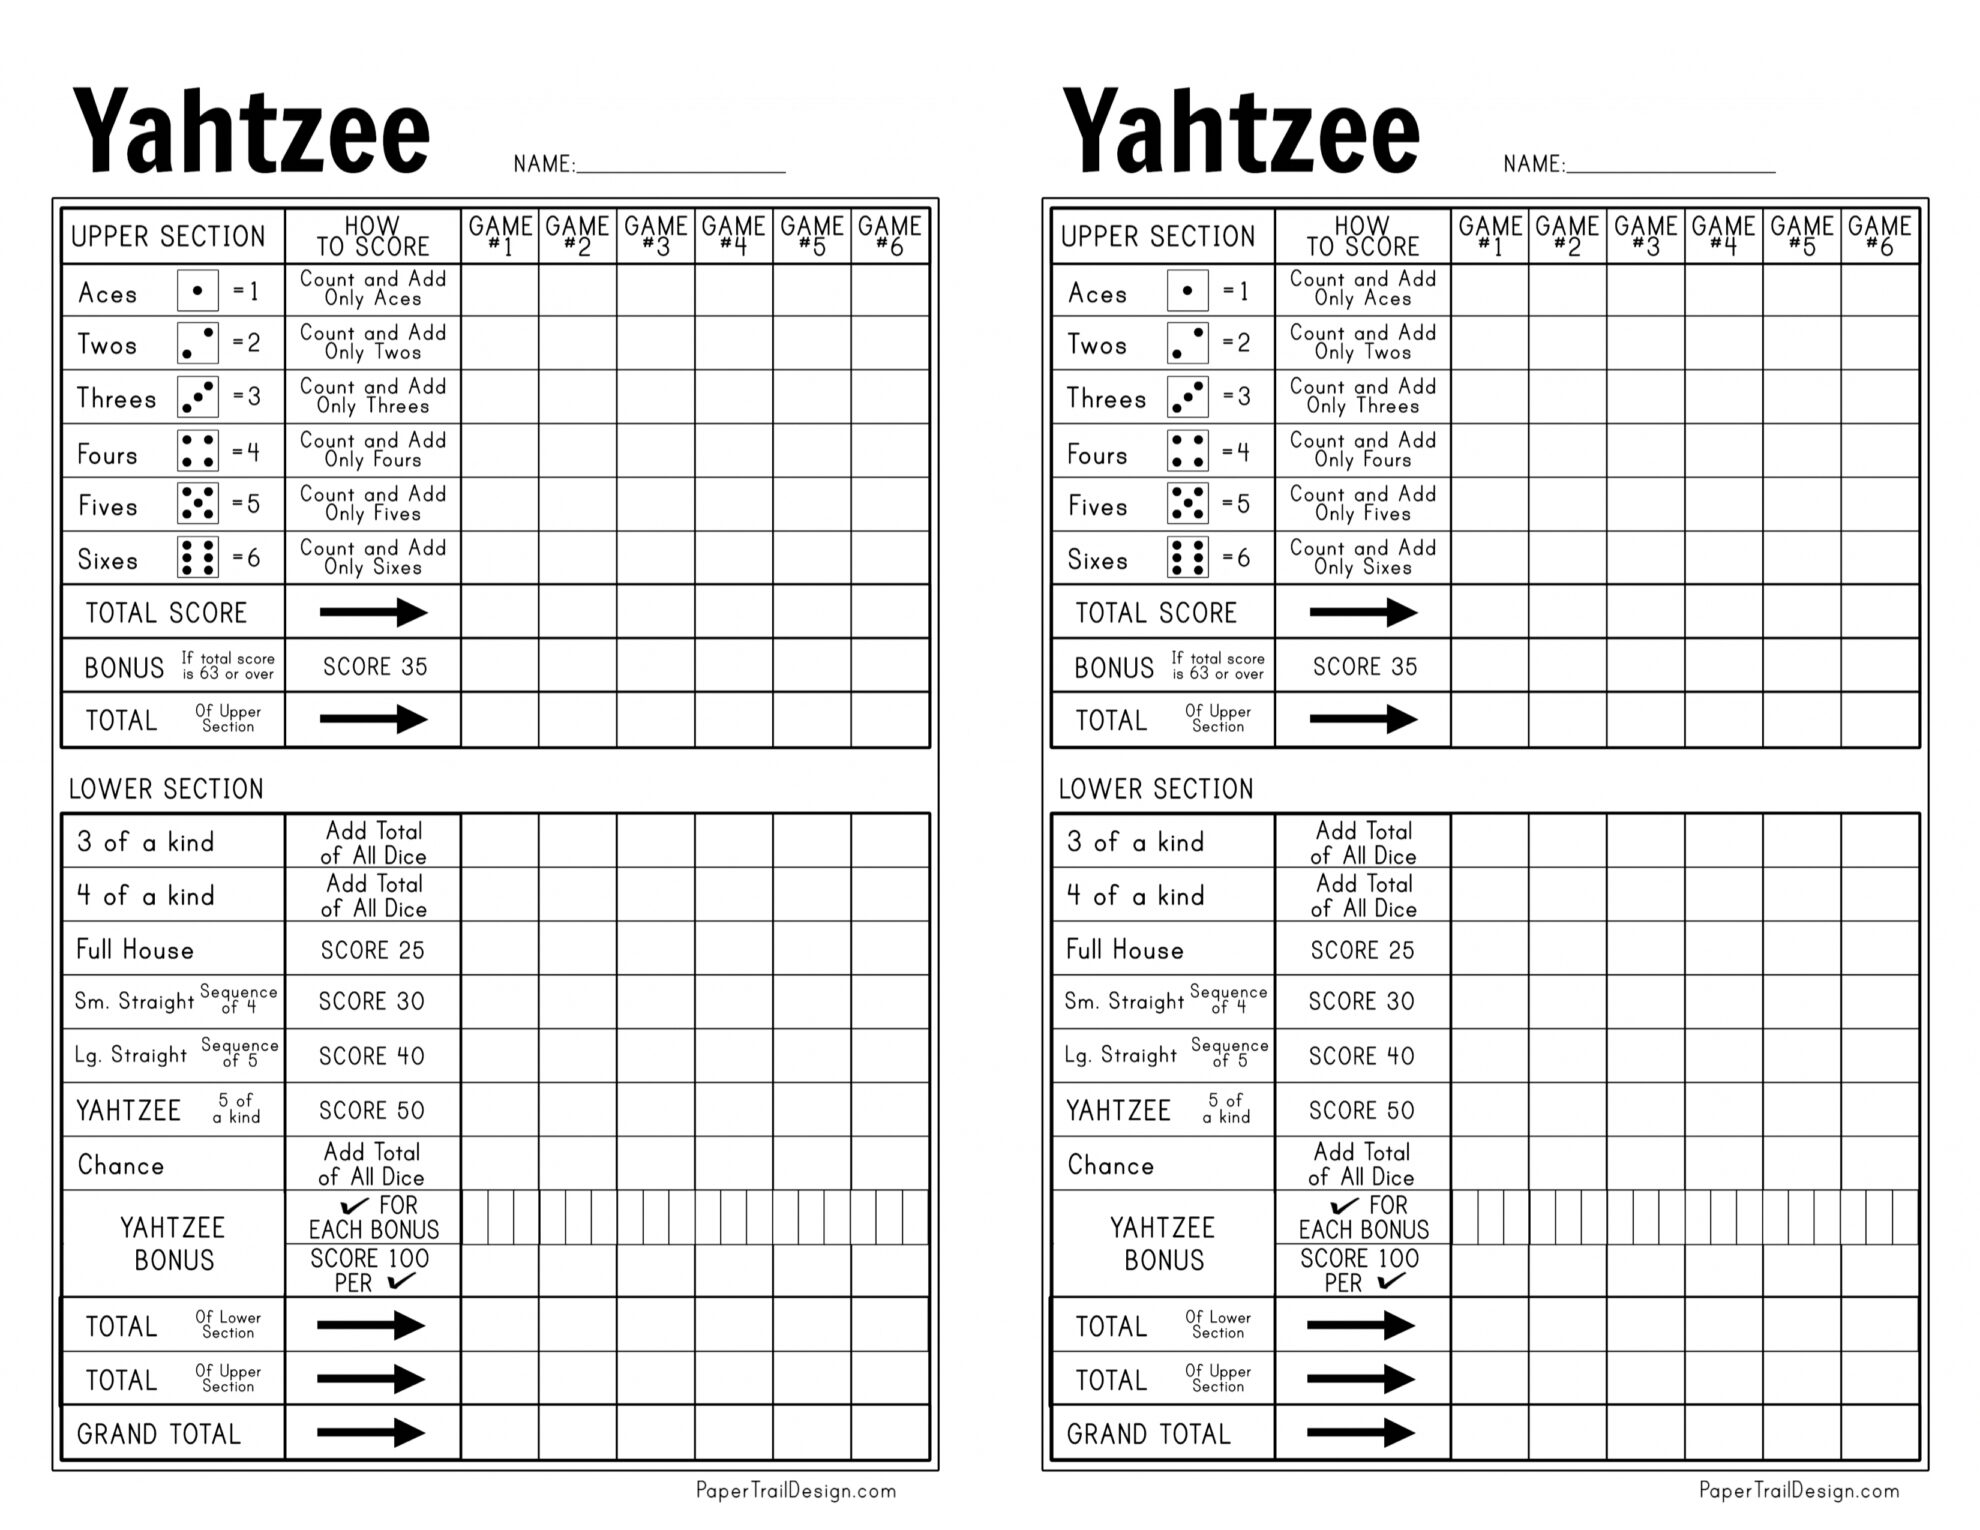 50 DOUBLE SIDED SHEETS - A6 SIZE 100 SIDES YAHTZEE SCORE CARDS 